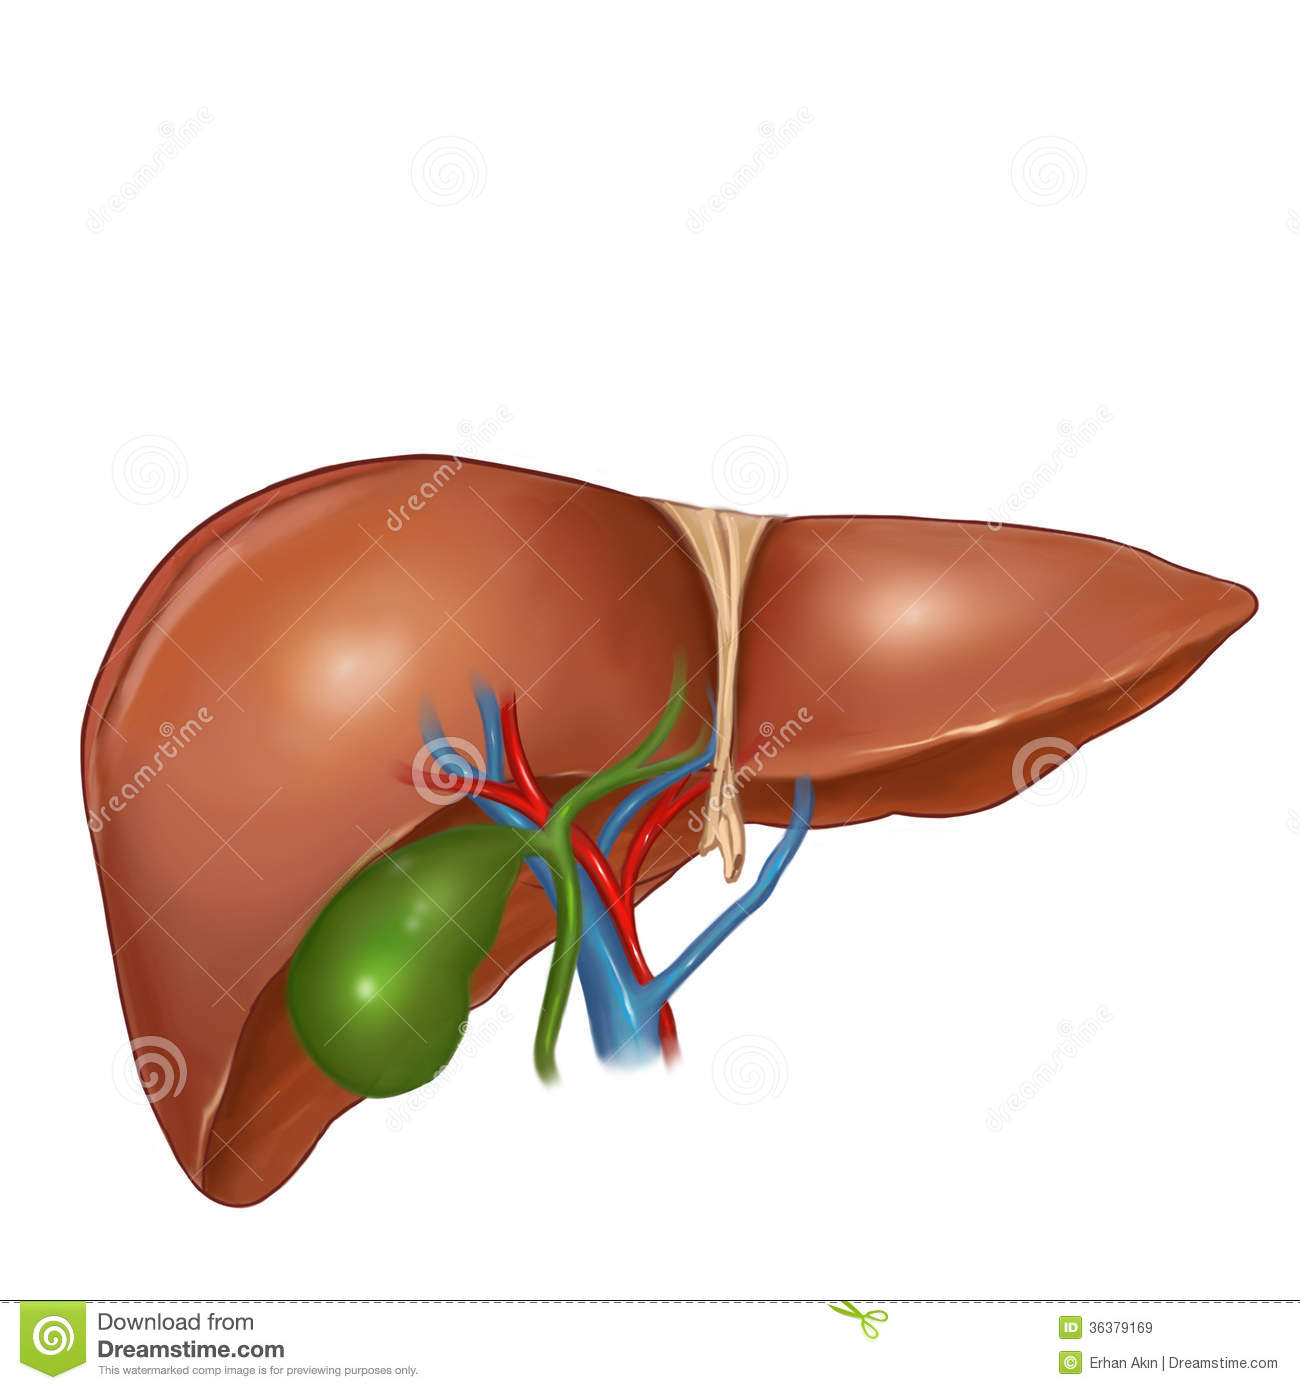 Liver Royalty Free Stock Images   Image  36379169